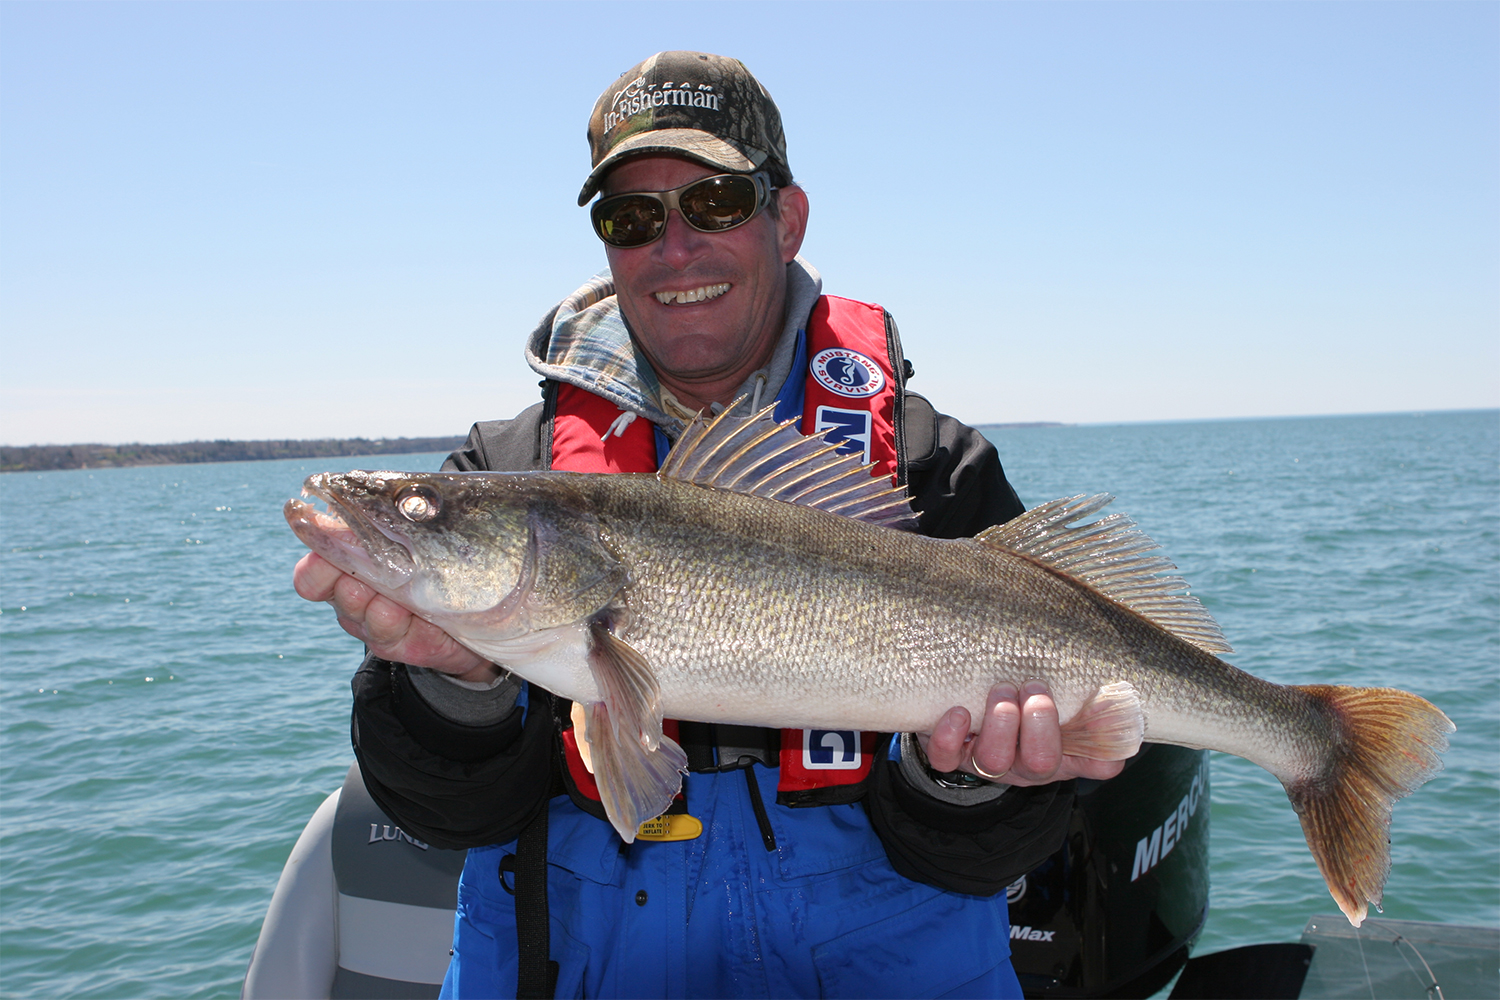 Angler holds up a large trophy walleye at the Great Lakes in Michigan.